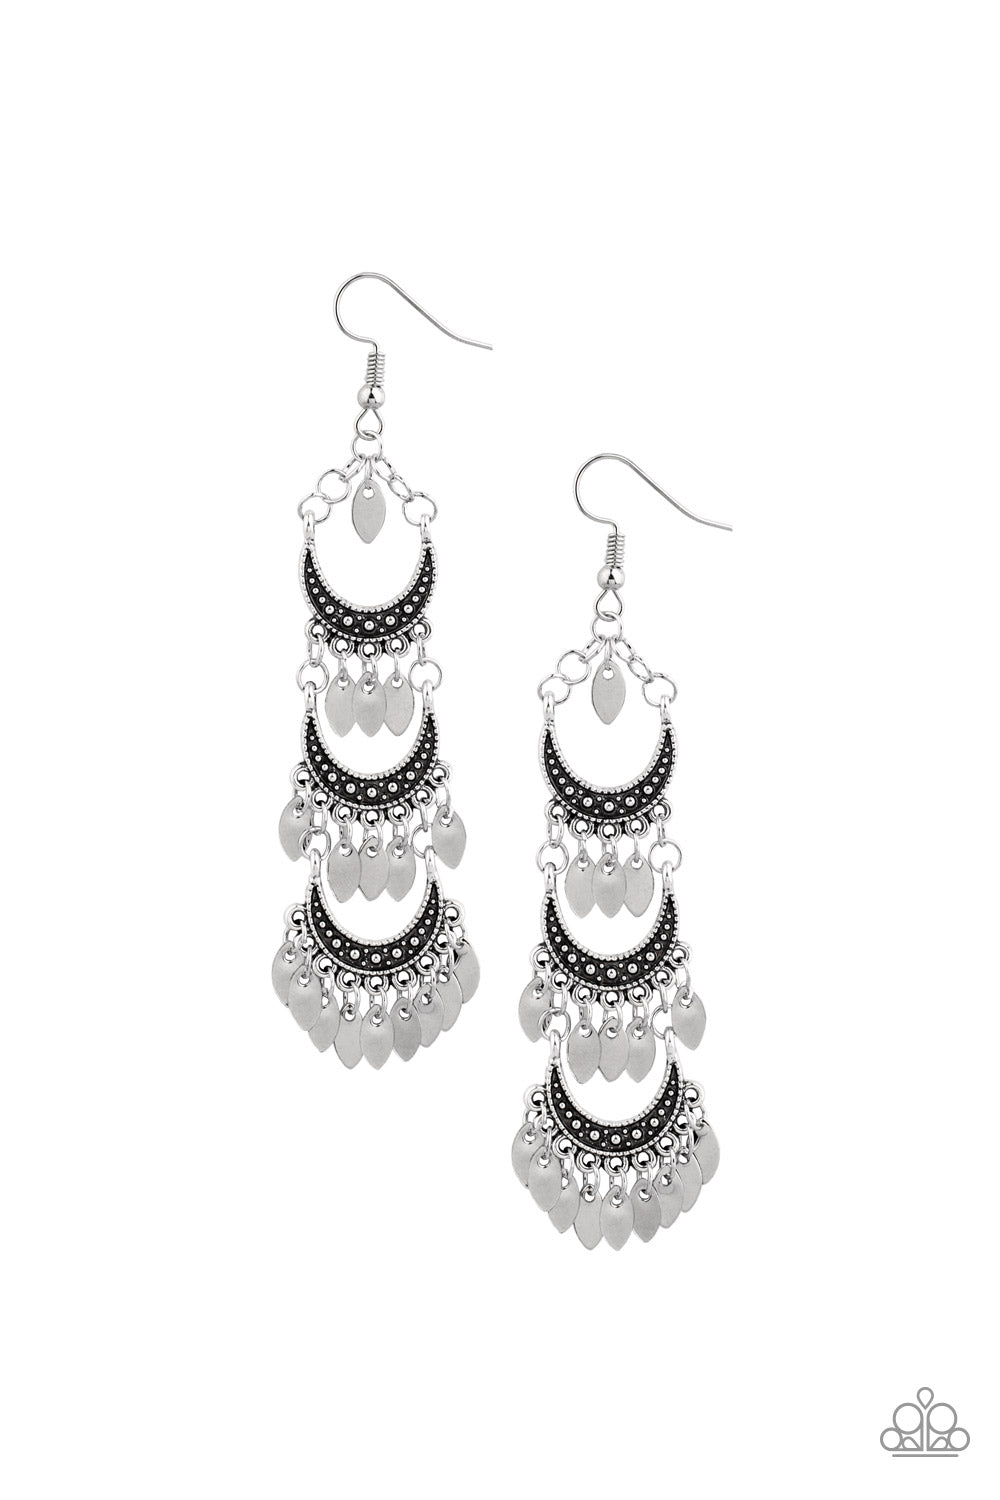 Paparazzi Accessories Take Your Chime - Silver Earrings - Lady T Accessories